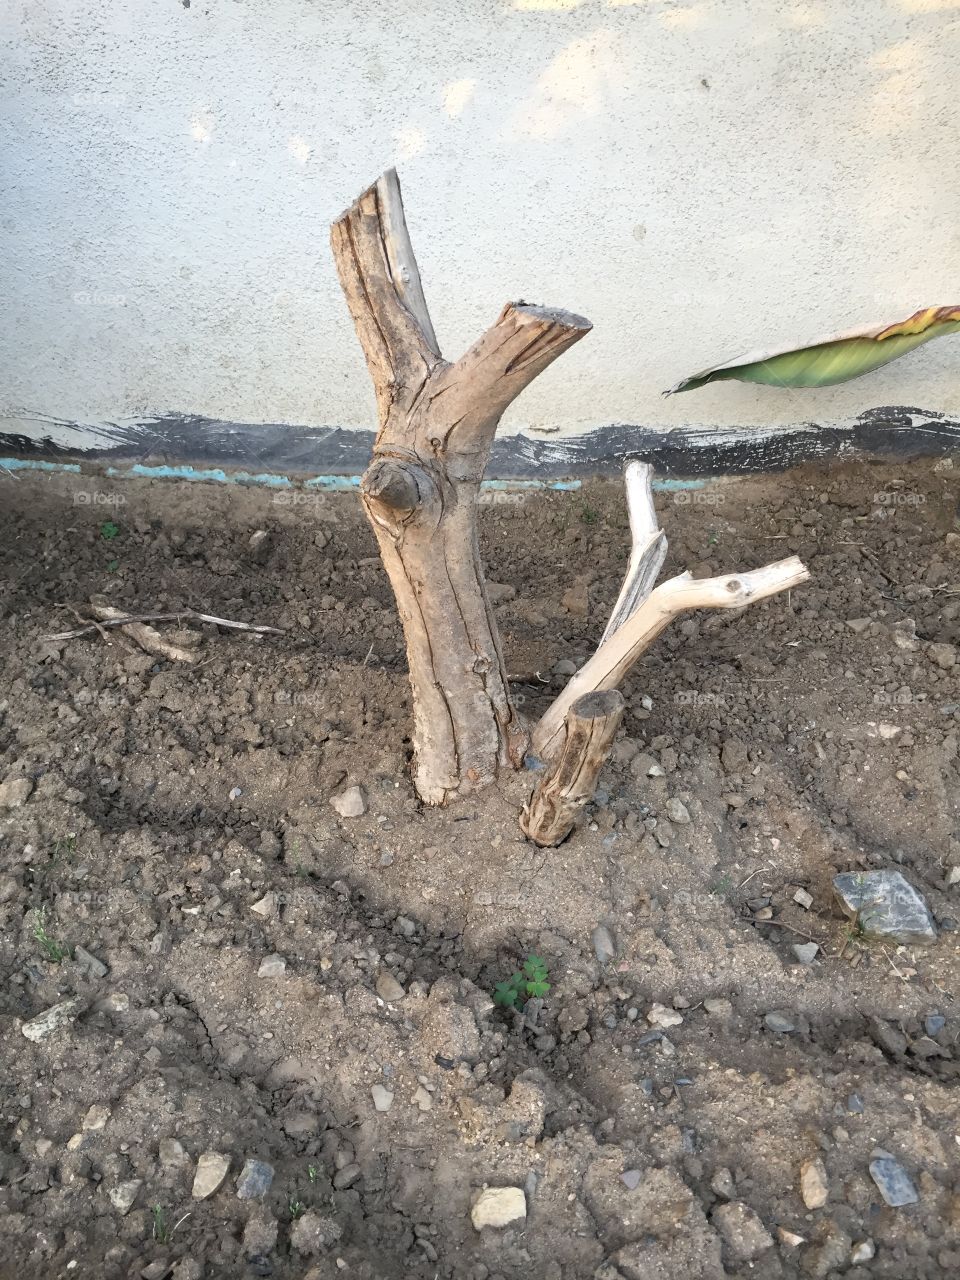 Tree Stump or Plant Stump Branch Coming Out of Soil